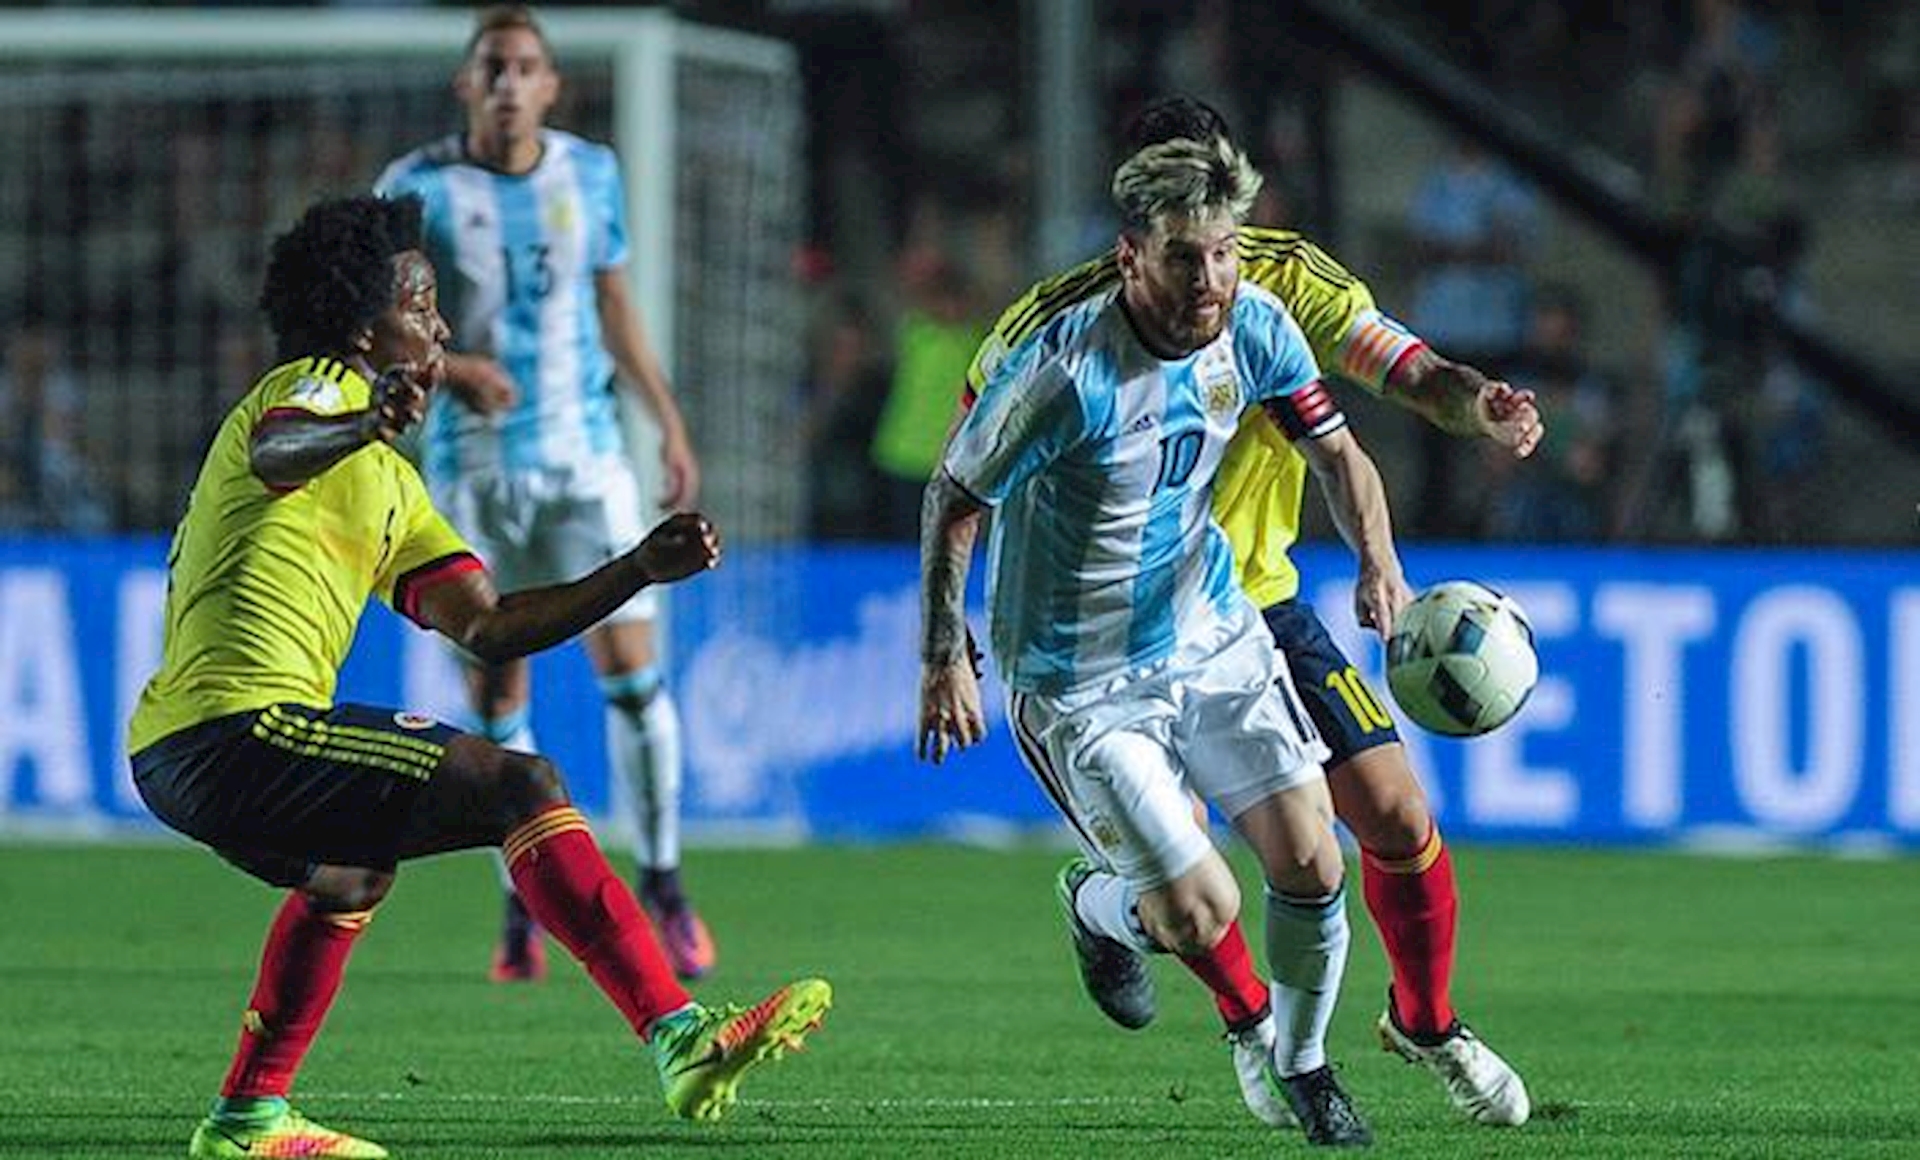 soi-keo-argentina-vs-colombia-8h-ngay-7-7-2021-1